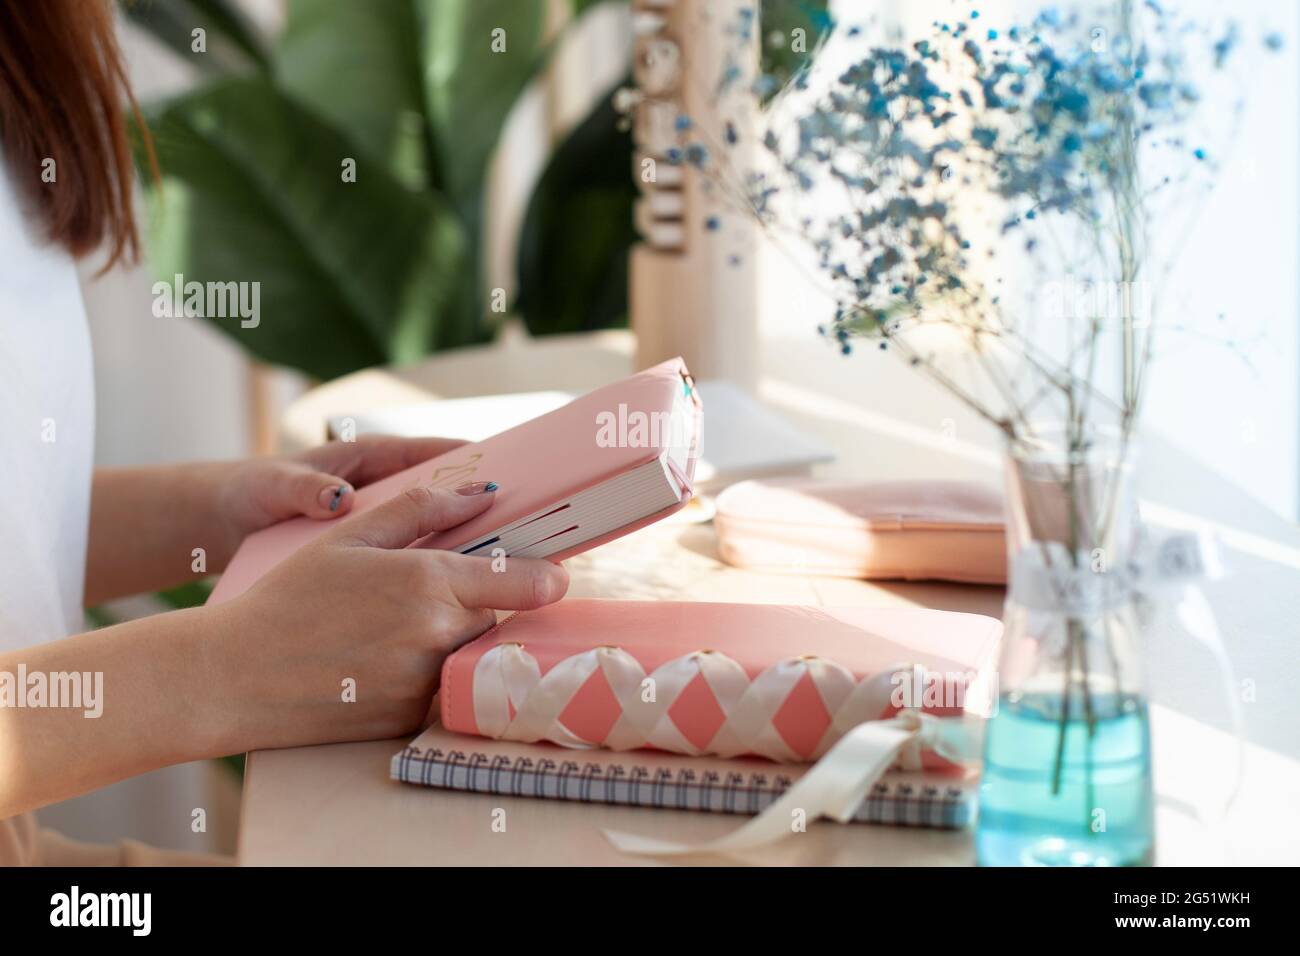 Female hands holding pink coral coloured leather diary 2021 while sitting near a window at cafe Stock Photo